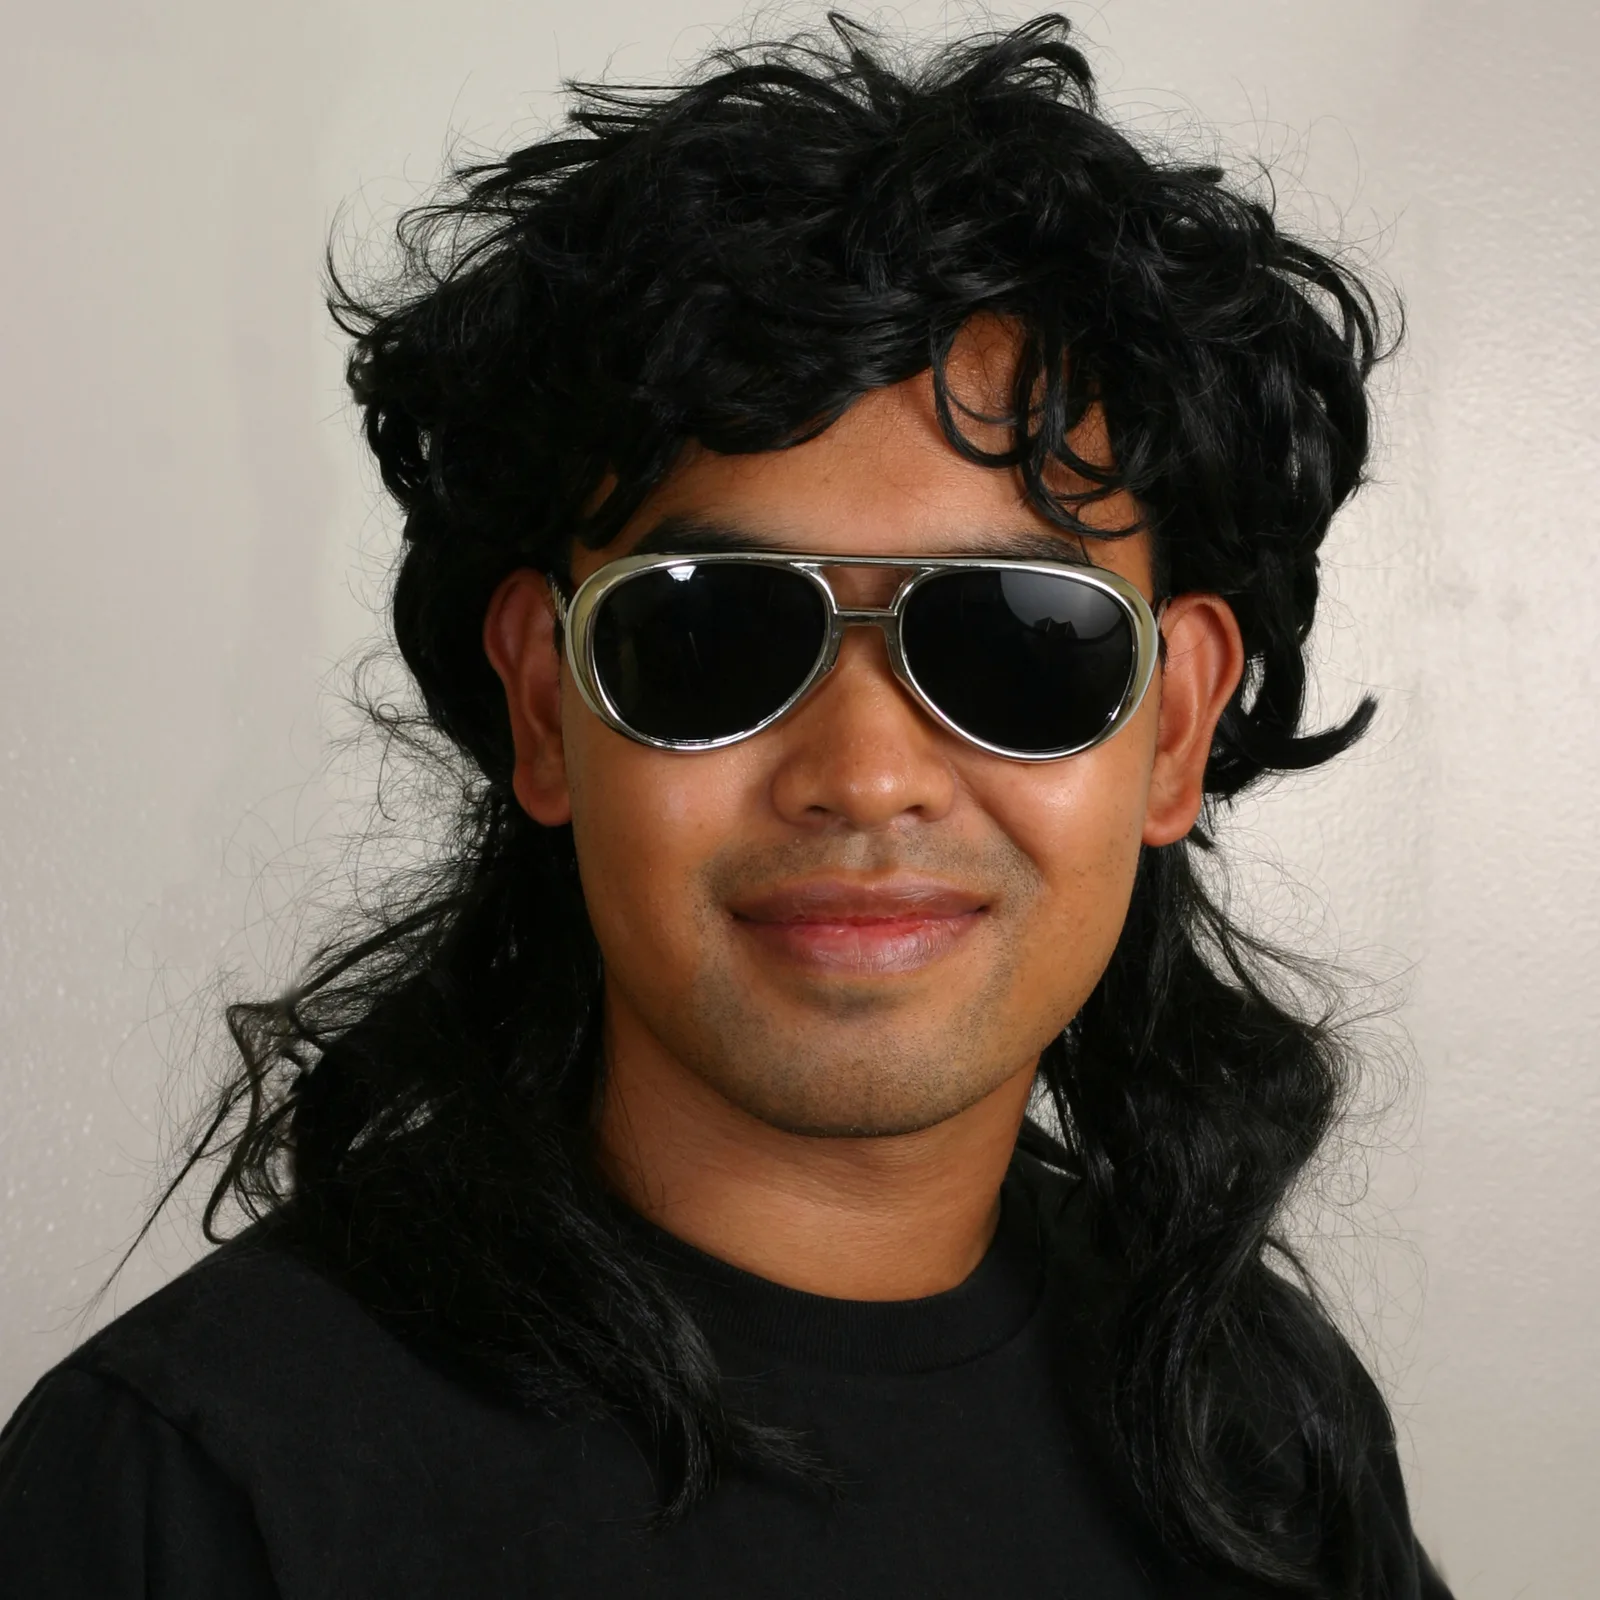 80s type of mullet on an Asian guy in black sunglasses in a school-type photo